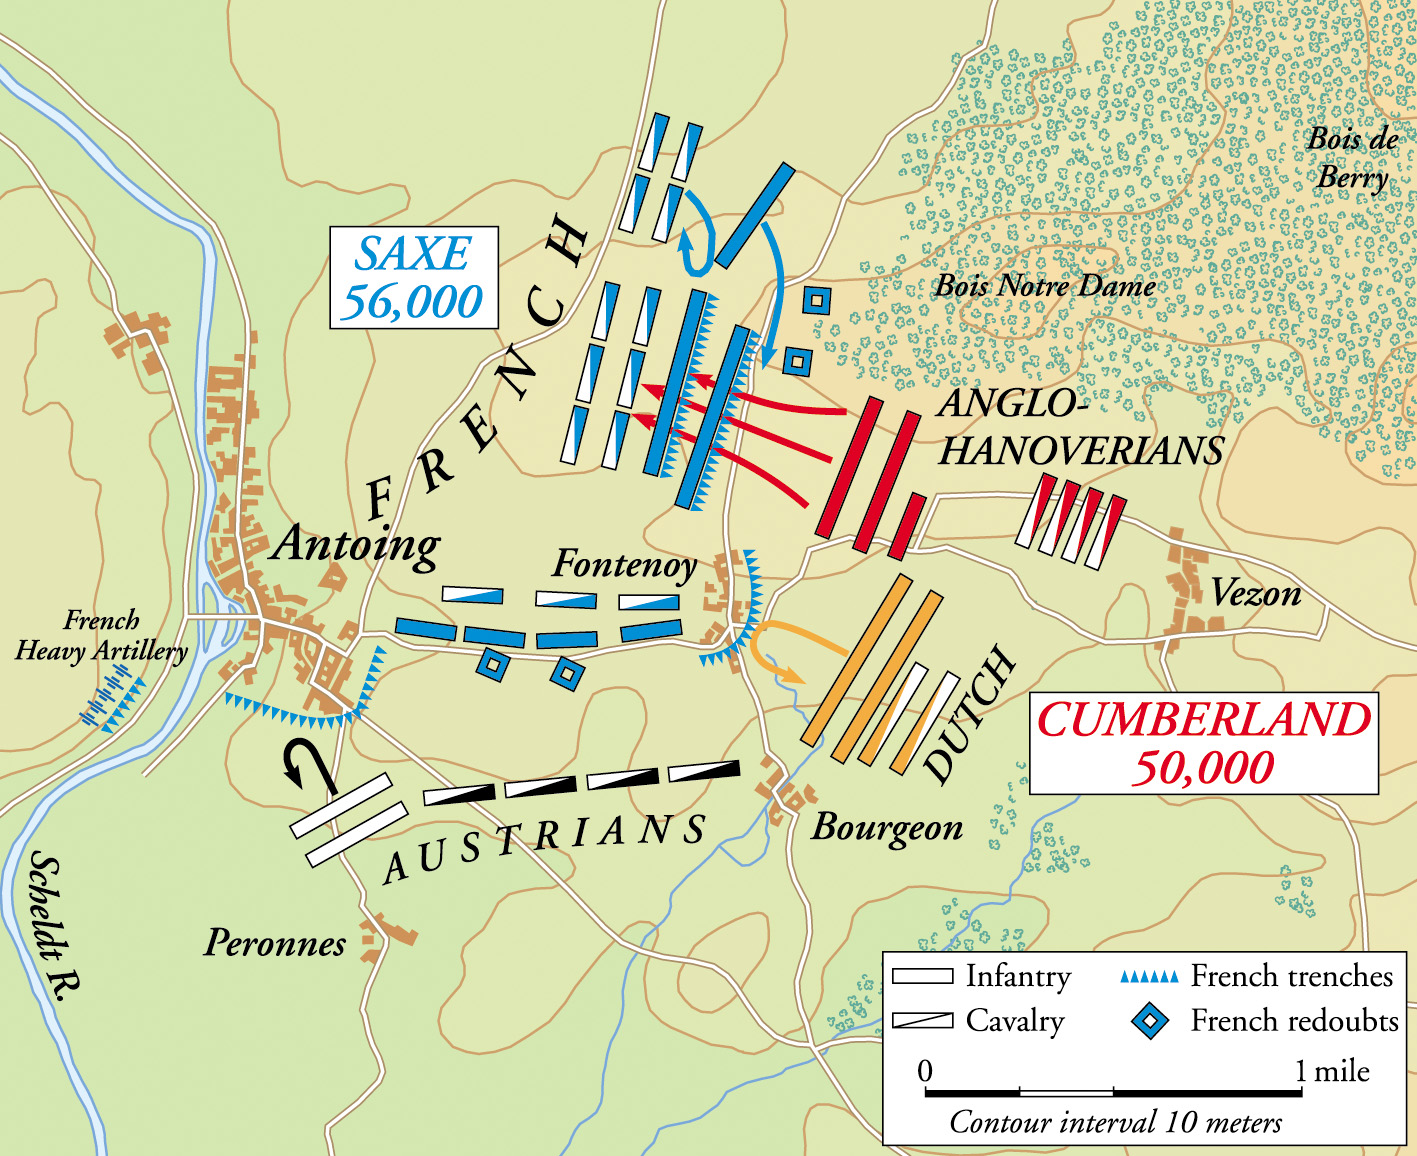 Saxe’s defensive position bristled with cannon and well-placed redoubts. Cumberland’s two columns of crack British and Hanoverian foot soldiers endangered the French left, but Saxe’s timely counterattacks saved the day. 